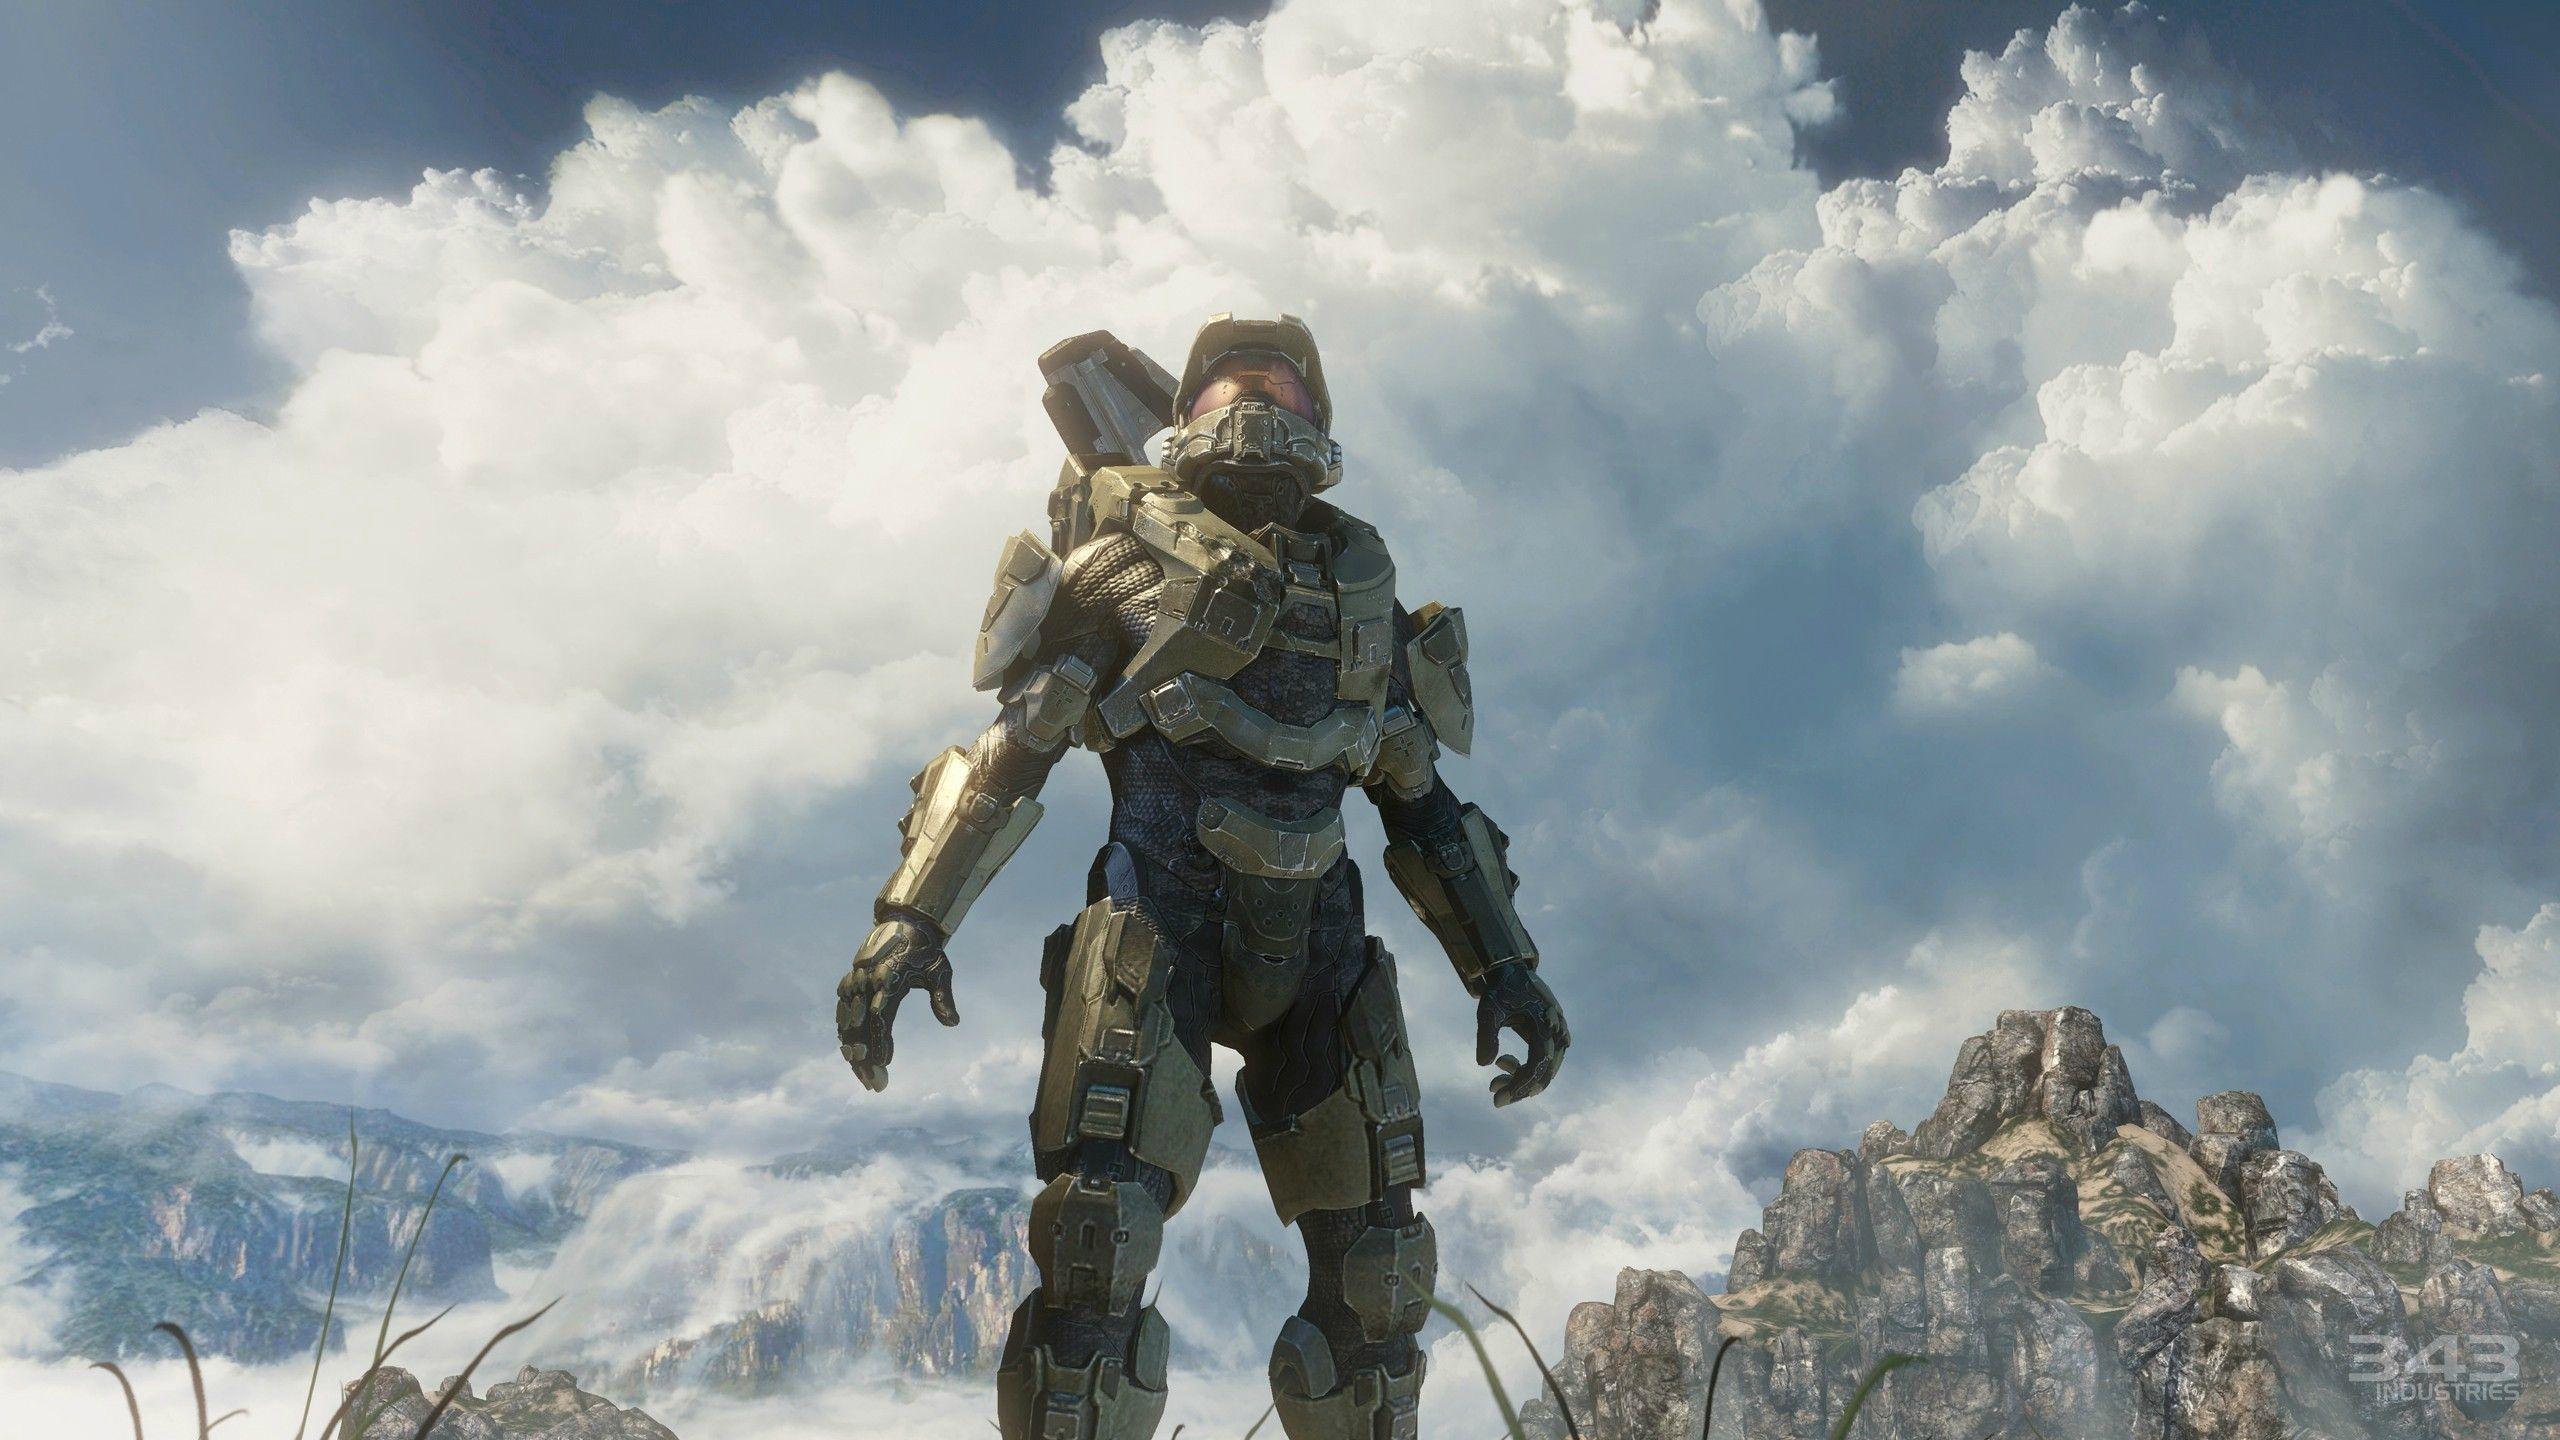 Best Game Games Video Xbox Halo Fresh New HD Wallpaper 2560x1440PX